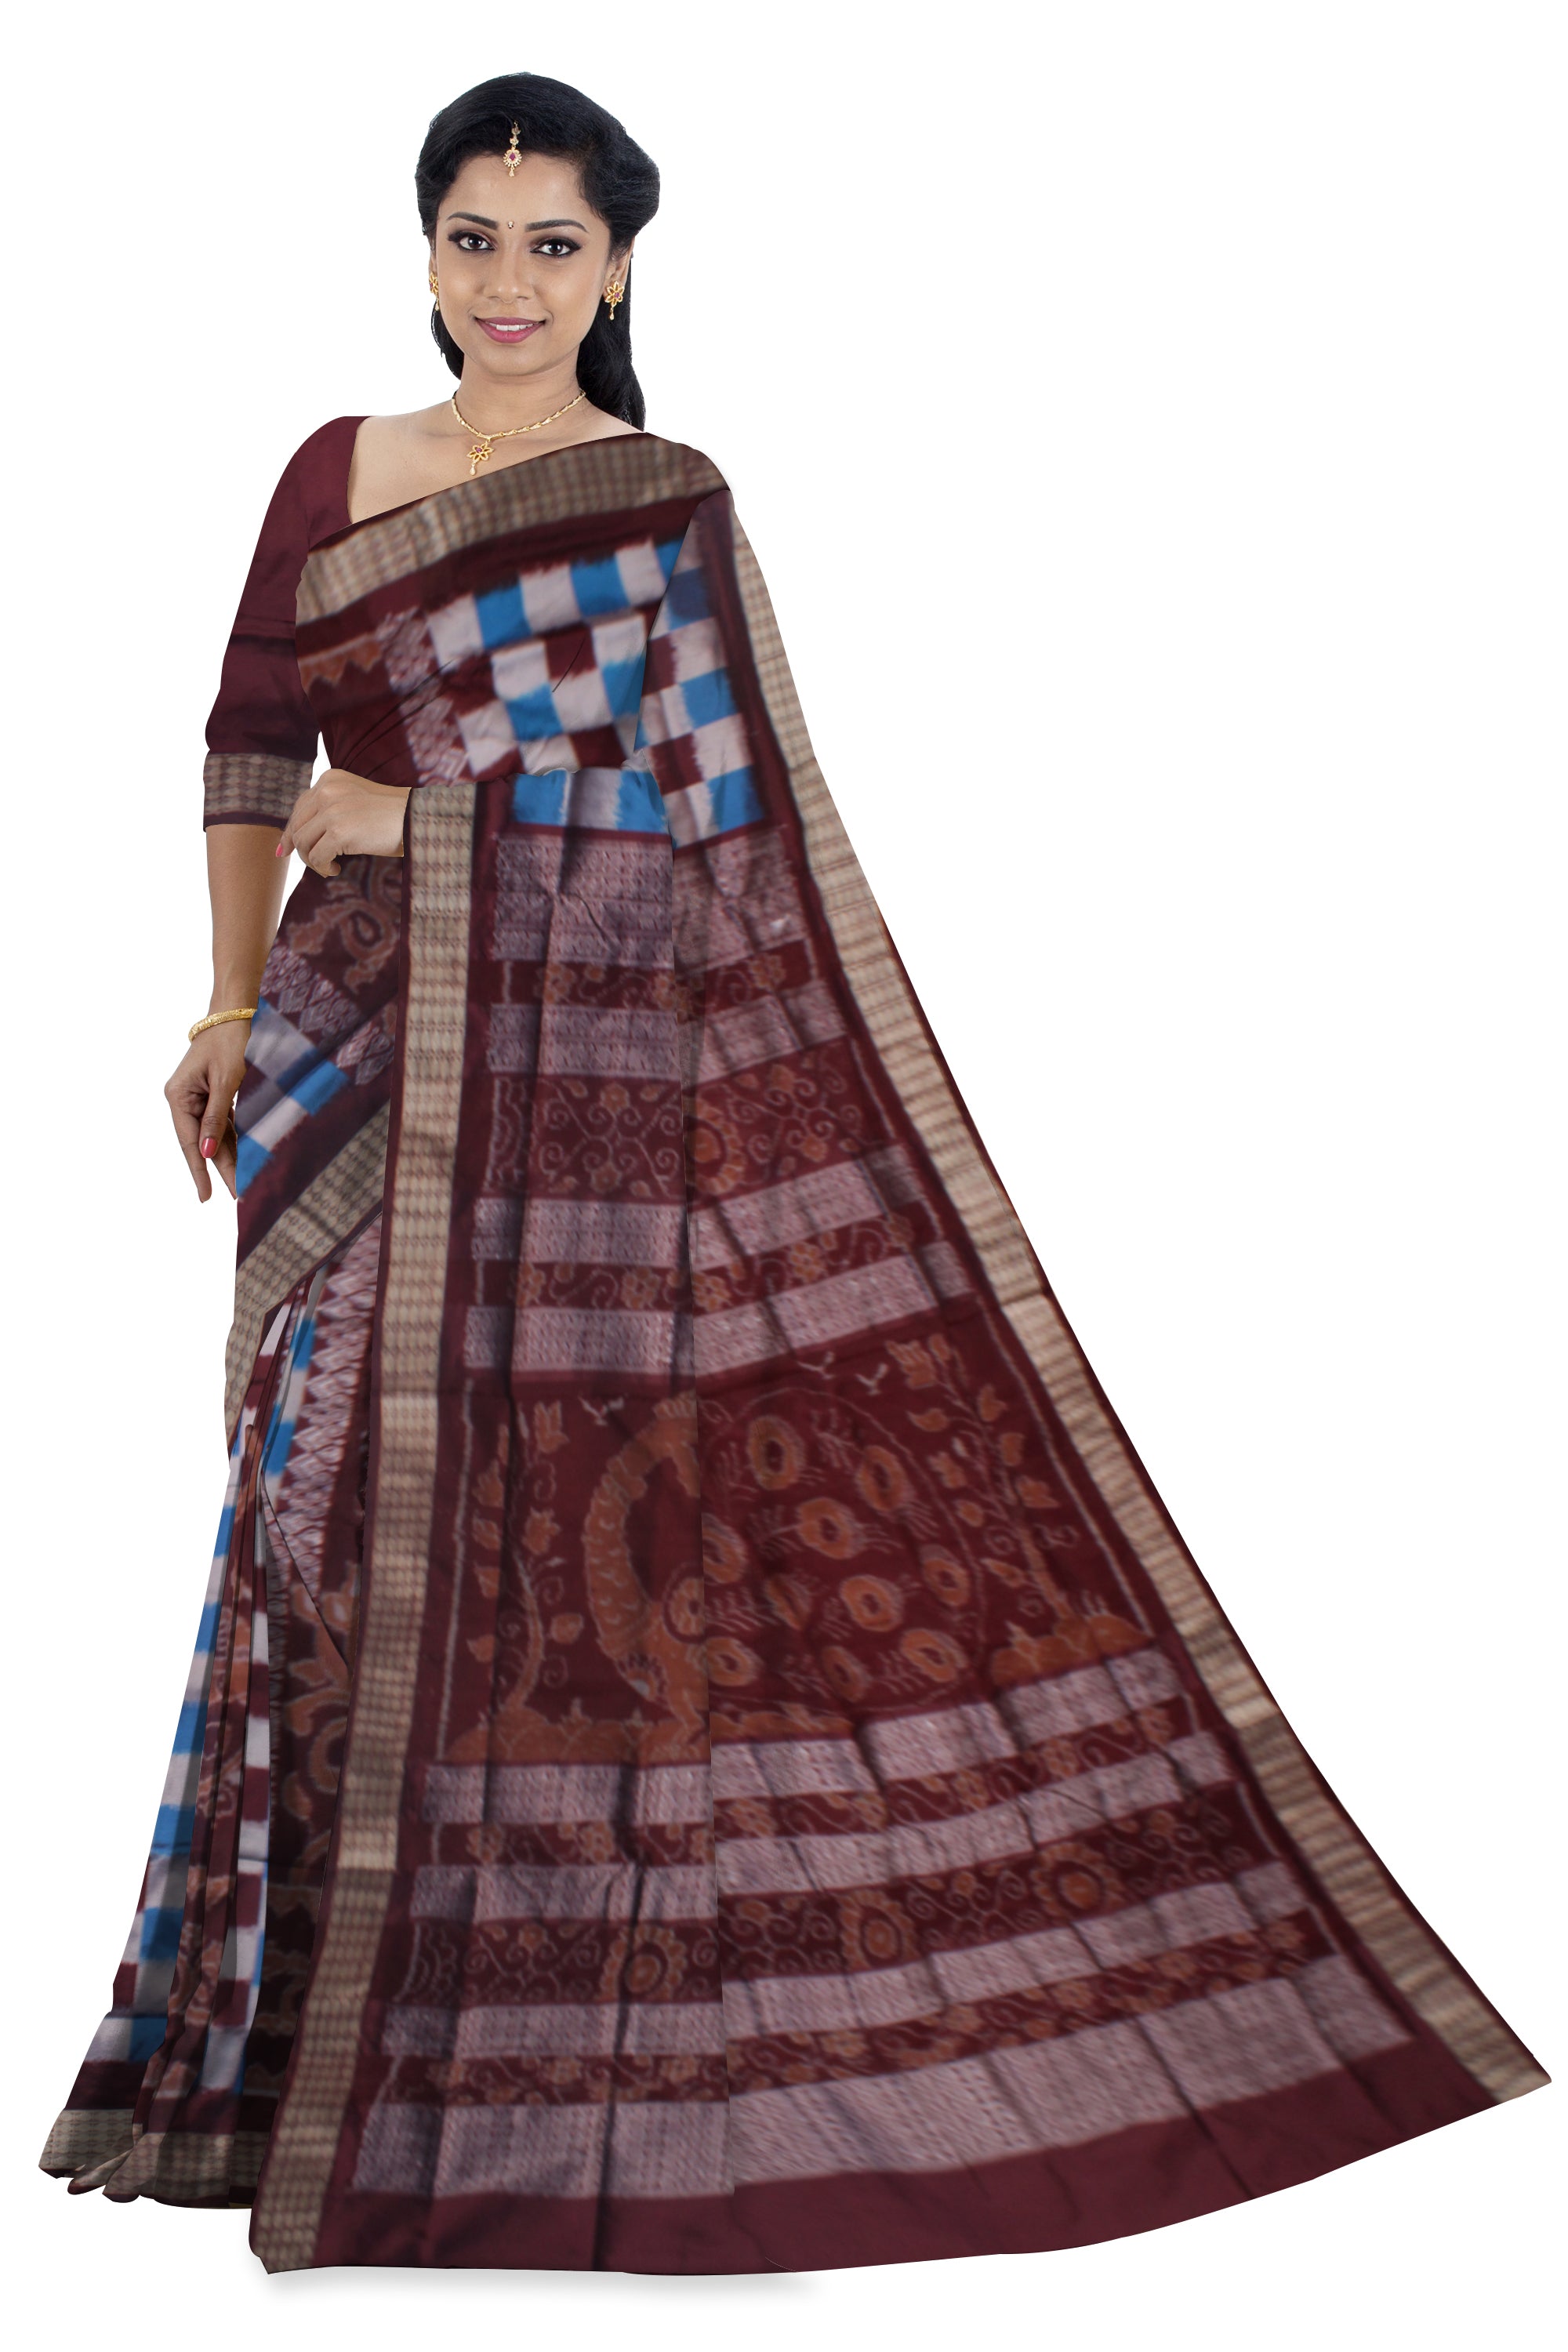 PASAPALI WITH PEACOCK PRINT BOMKEI PATA SAREE IS SLY AND COFFEE COLOR ,COMES WITH MATCHING BLOUSE PIECE. - Koshali Arts & Crafts Enterprise